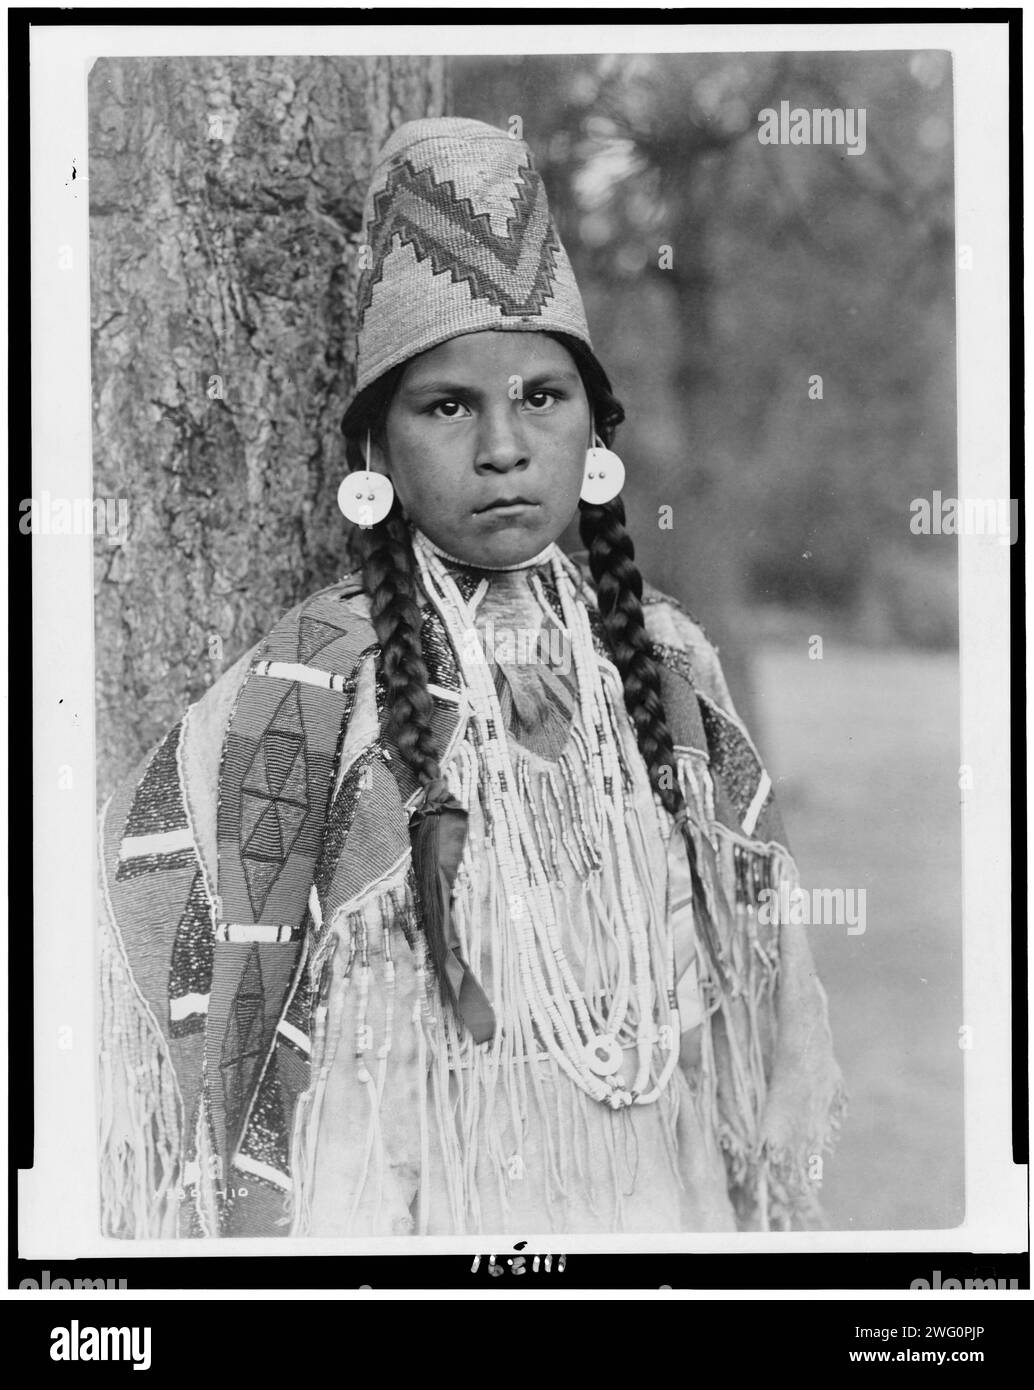 Umatilla maiden, c1910. Umatilla woman, half-length portrait, facing front, standing in front of tree, wearing beaded buckskin dress, shell bead necklaces, shell disk earrings, and woven grass hat. Stock Photo